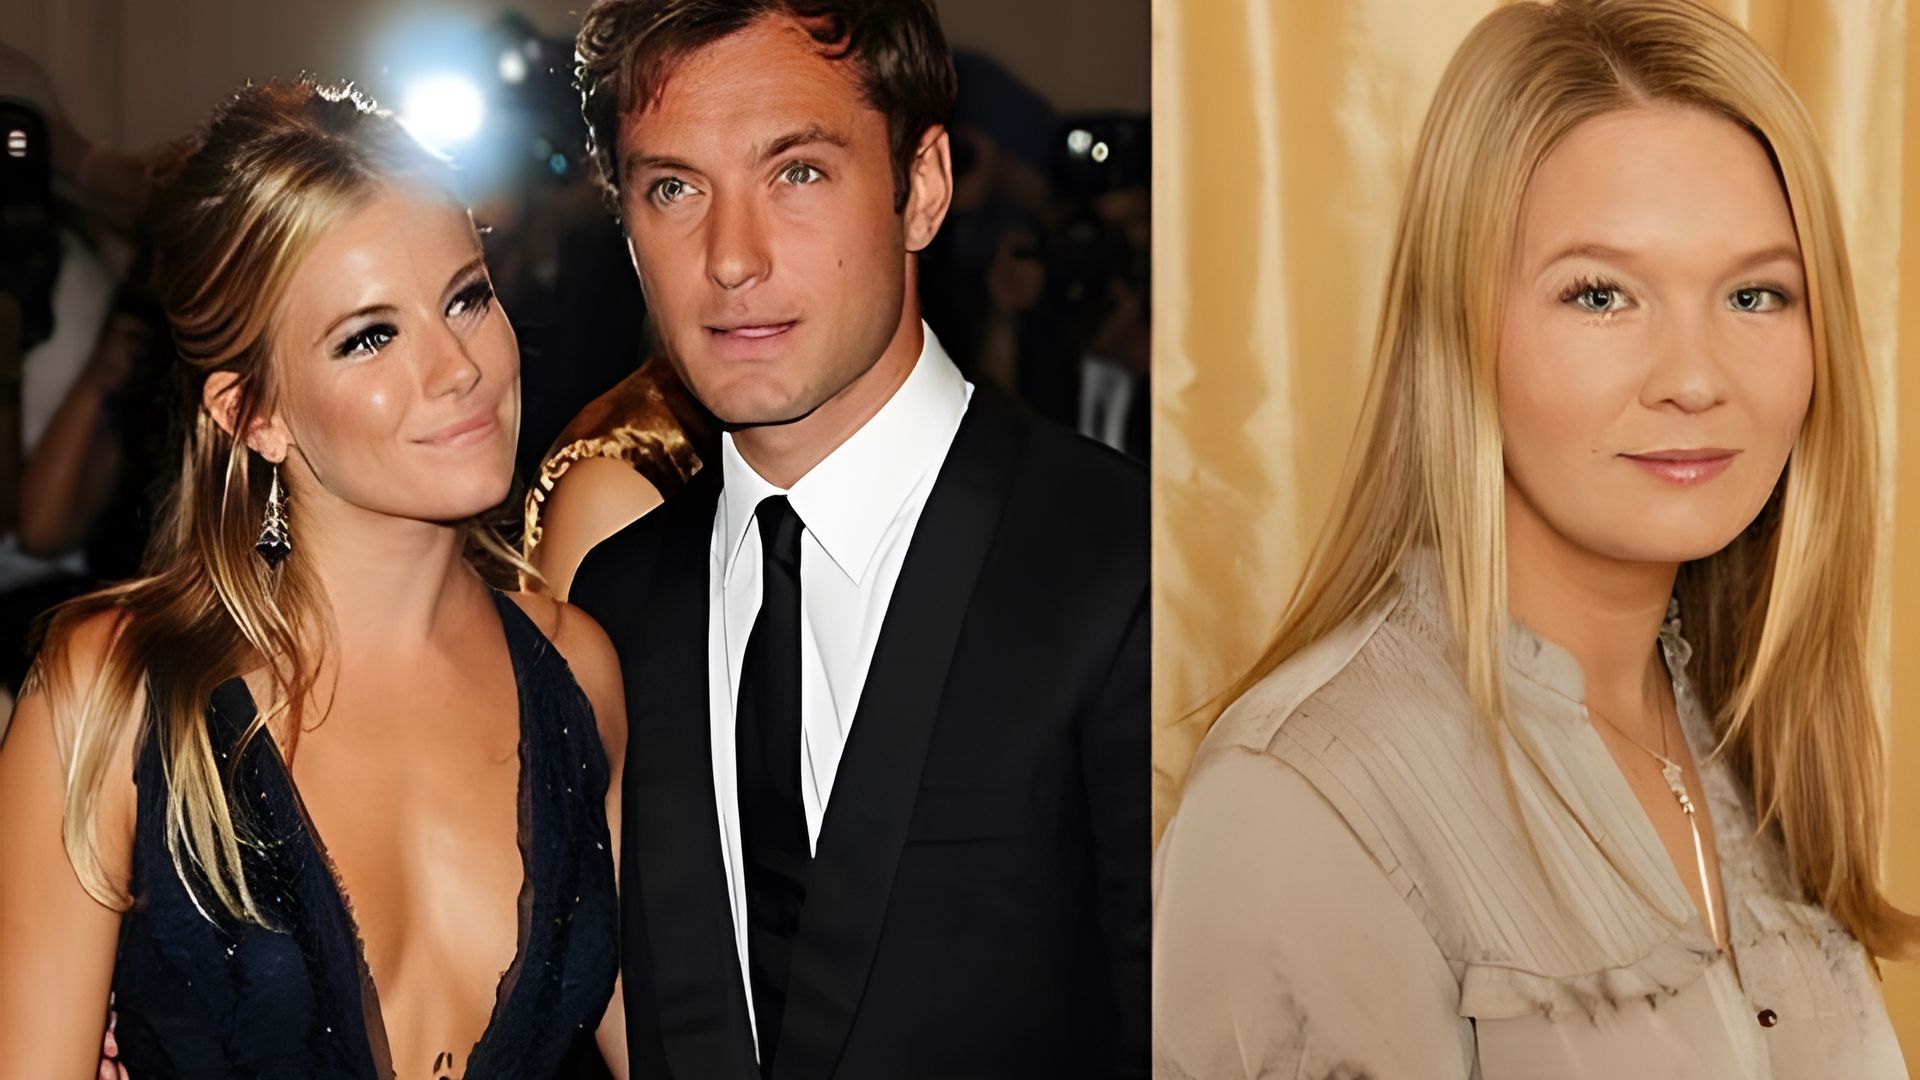 While married to Sienna Miller, Jude Law cheated on her with the nanny